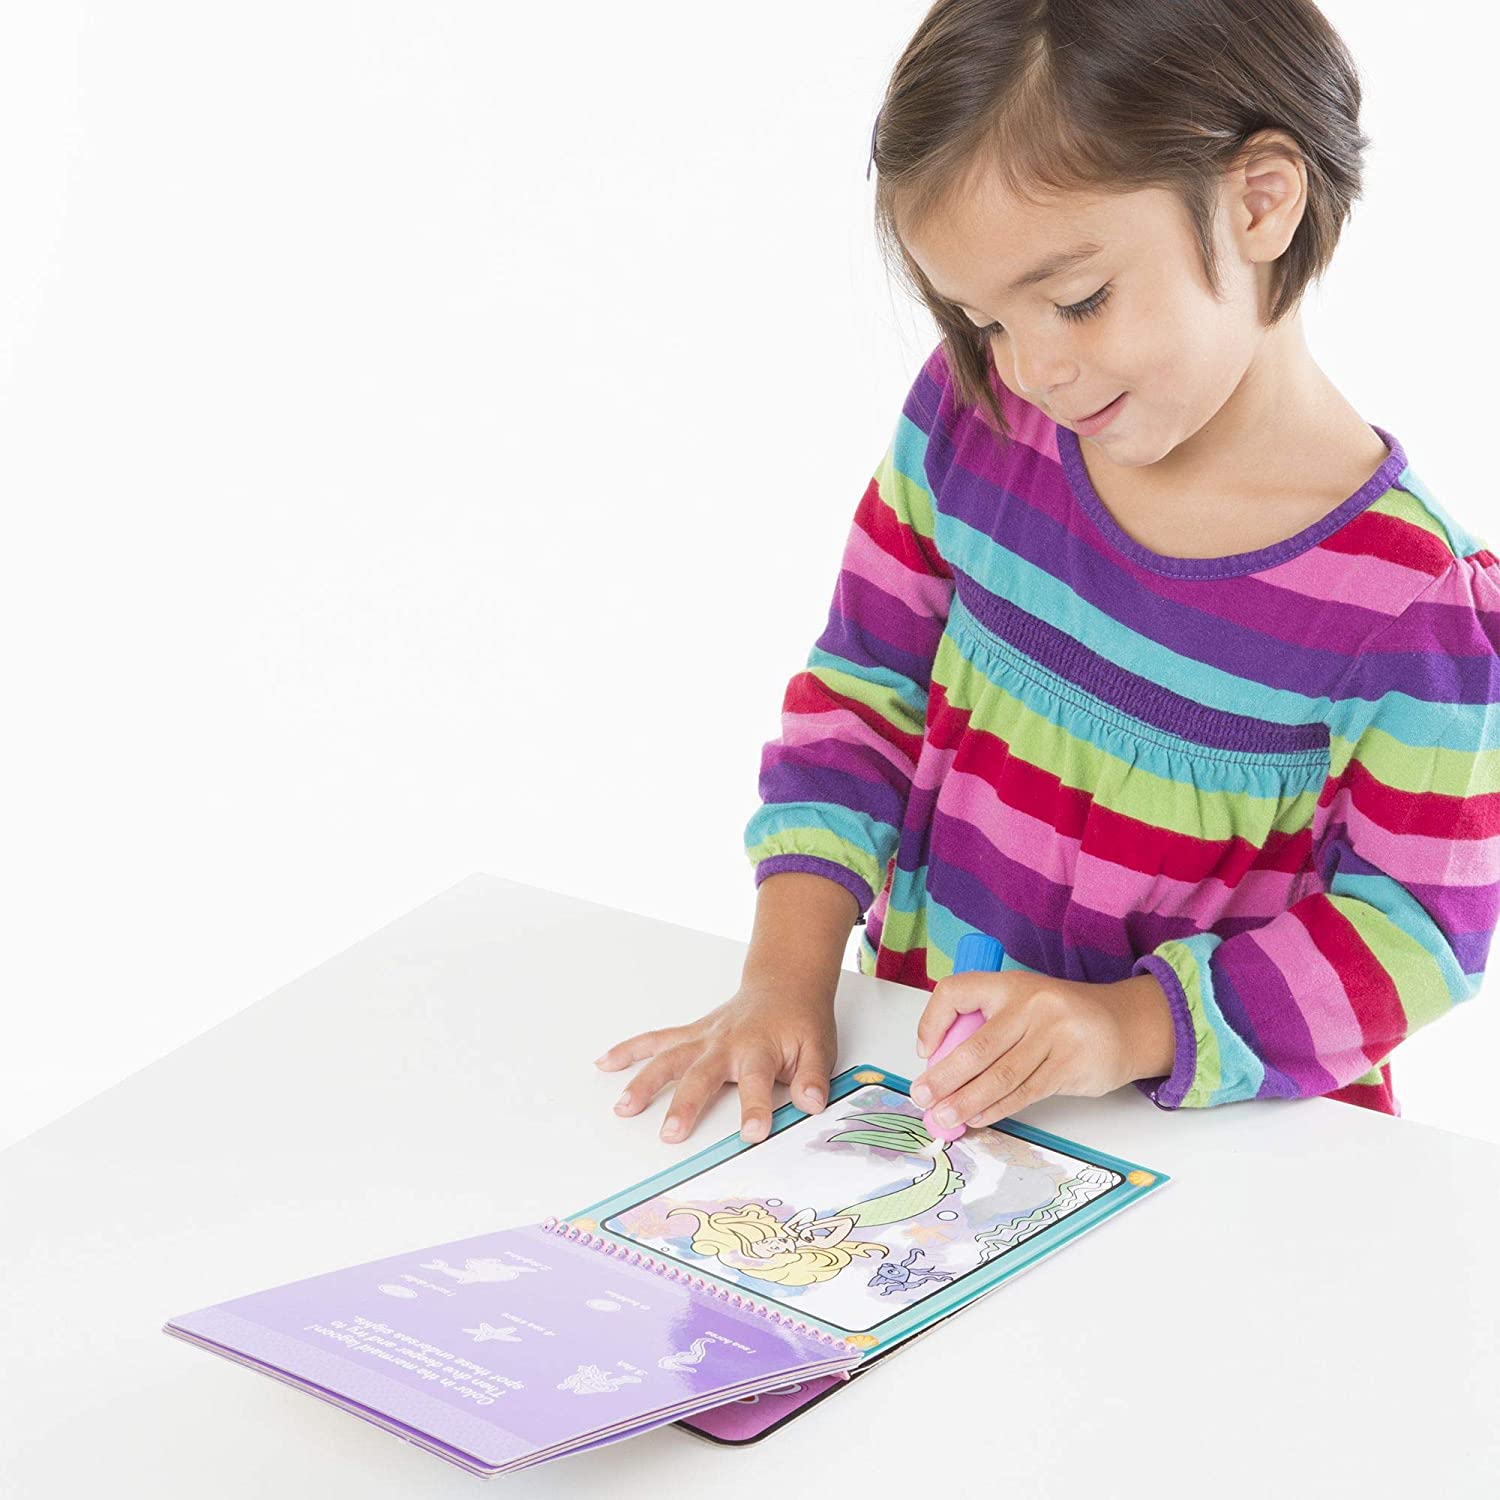 Water Wow! Reusable Water-Reveal Activity Pad - Fairy Tale